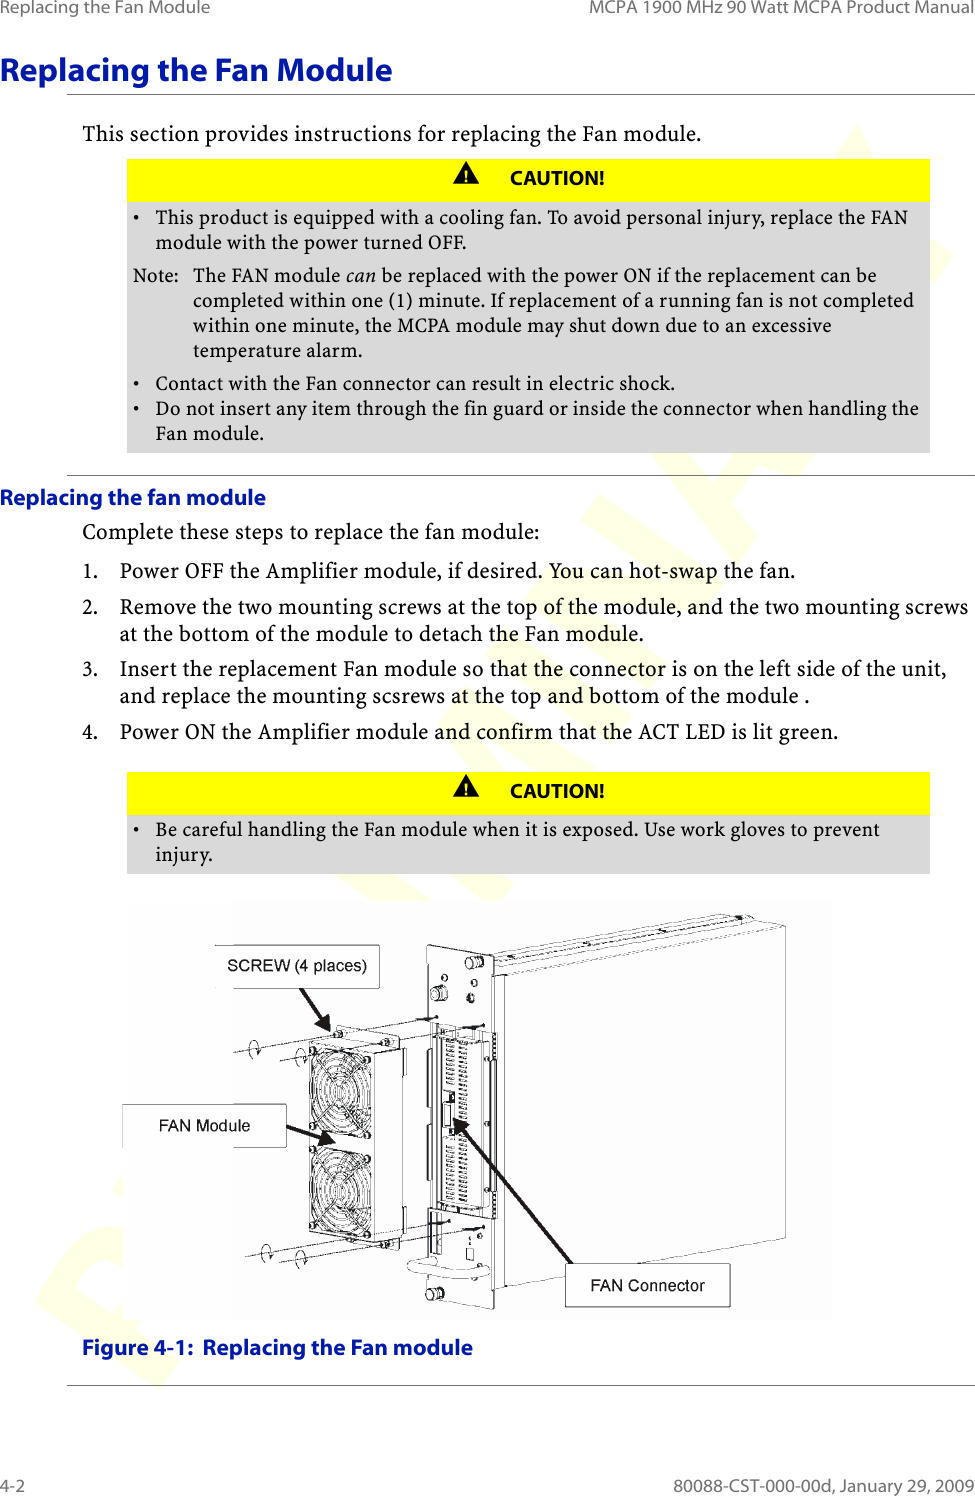 Replacing the Fan Module MCPA 1900 MHz 90 Watt MCPA Product Manual4-2 80088-CST-000-00d, January 29, 2009Replacing the Fan ModuleThis section provides instructions for replacing the Fan module.Replacing the fan moduleComplete these steps to replace the fan module:1. Power OFF the Amplifier module, if desired. You can hot-swap the fan.2. Remove the two mounting screws at the top of the module, and the two mounting screws at the bottom of the module to detach the Fan module.3. Insert the replacement Fan module so that the connector is on the left side of the unit, and replace the mounting scsrews at the top and bottom of the module .4. Power ON the Amplifier module and confirm that the ACT LED is lit green.Figure 4-1:  Replacing the Fan moduleCAUTION!• This product is equipped with a cooling fan. To avoid personal injury, replace the FAN module with the power turned OFF. Note: The FAN module can be replaced with the power ON if the replacement can be completed within one (1) minute. If replacement of a running fan is not completed within one minute, the MCPA module may shut down due to an excessive temperature alarm.• Contact with the Fan connector can result in electric shock.• Do not insert any item through the fin guard or inside the connector when handling the Fan module.CAUTION!• Be careful handling the Fan module when it is exposed. Use work gloves to prevent injury.